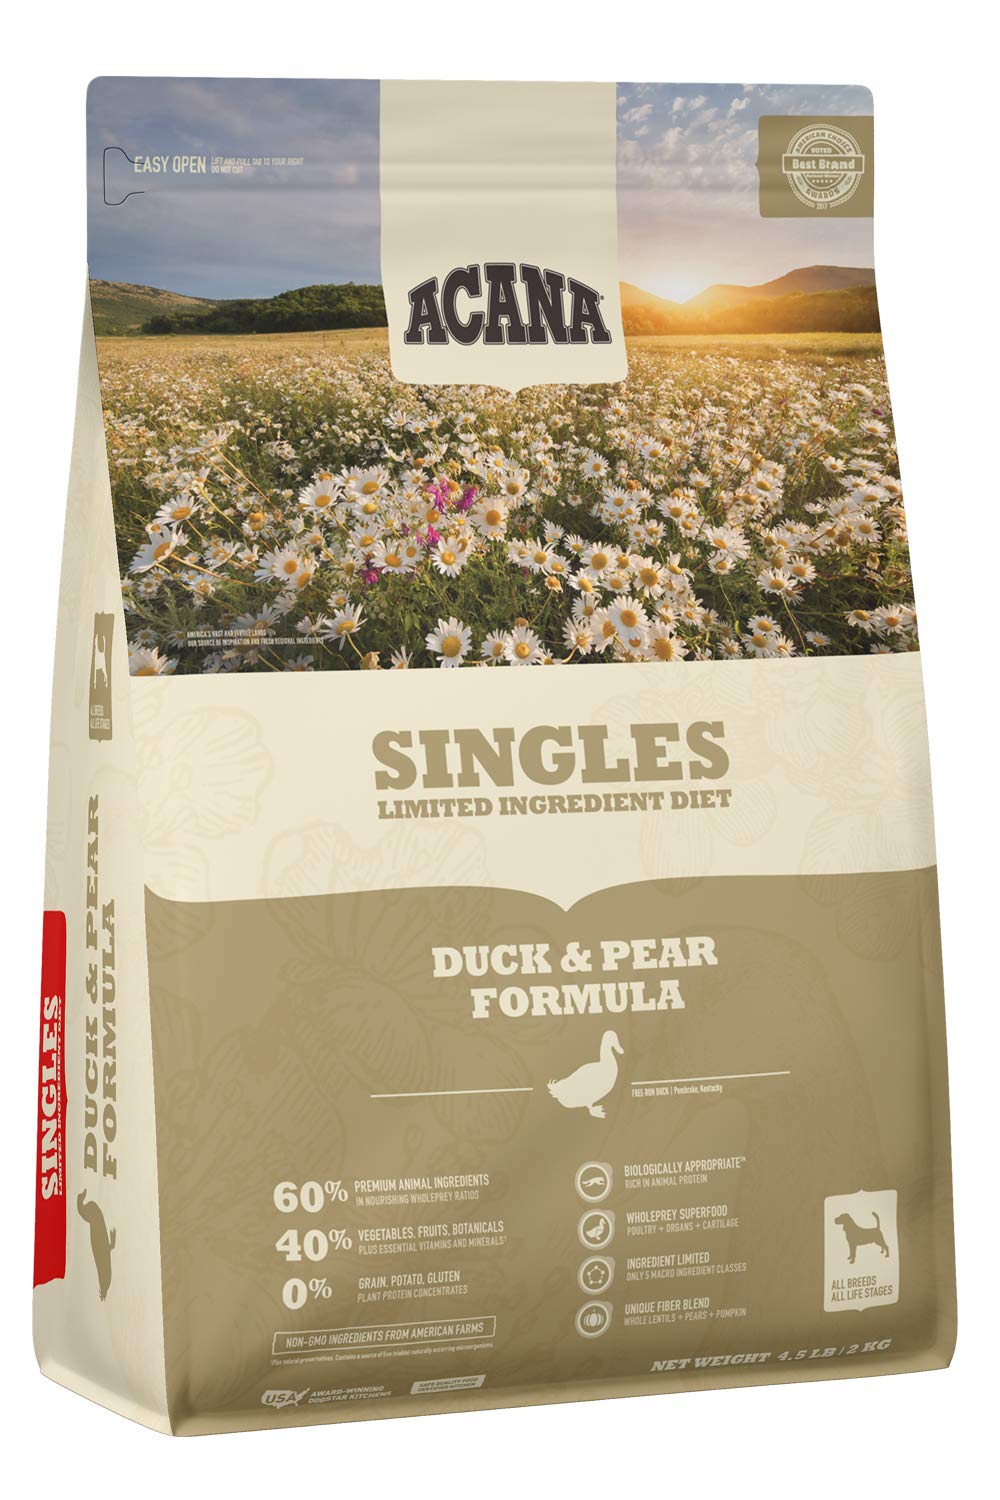 ACANA Singles Duck and Pear Recipe, 4.5lbs, Limited Ingredient Diet Dry Dog Food